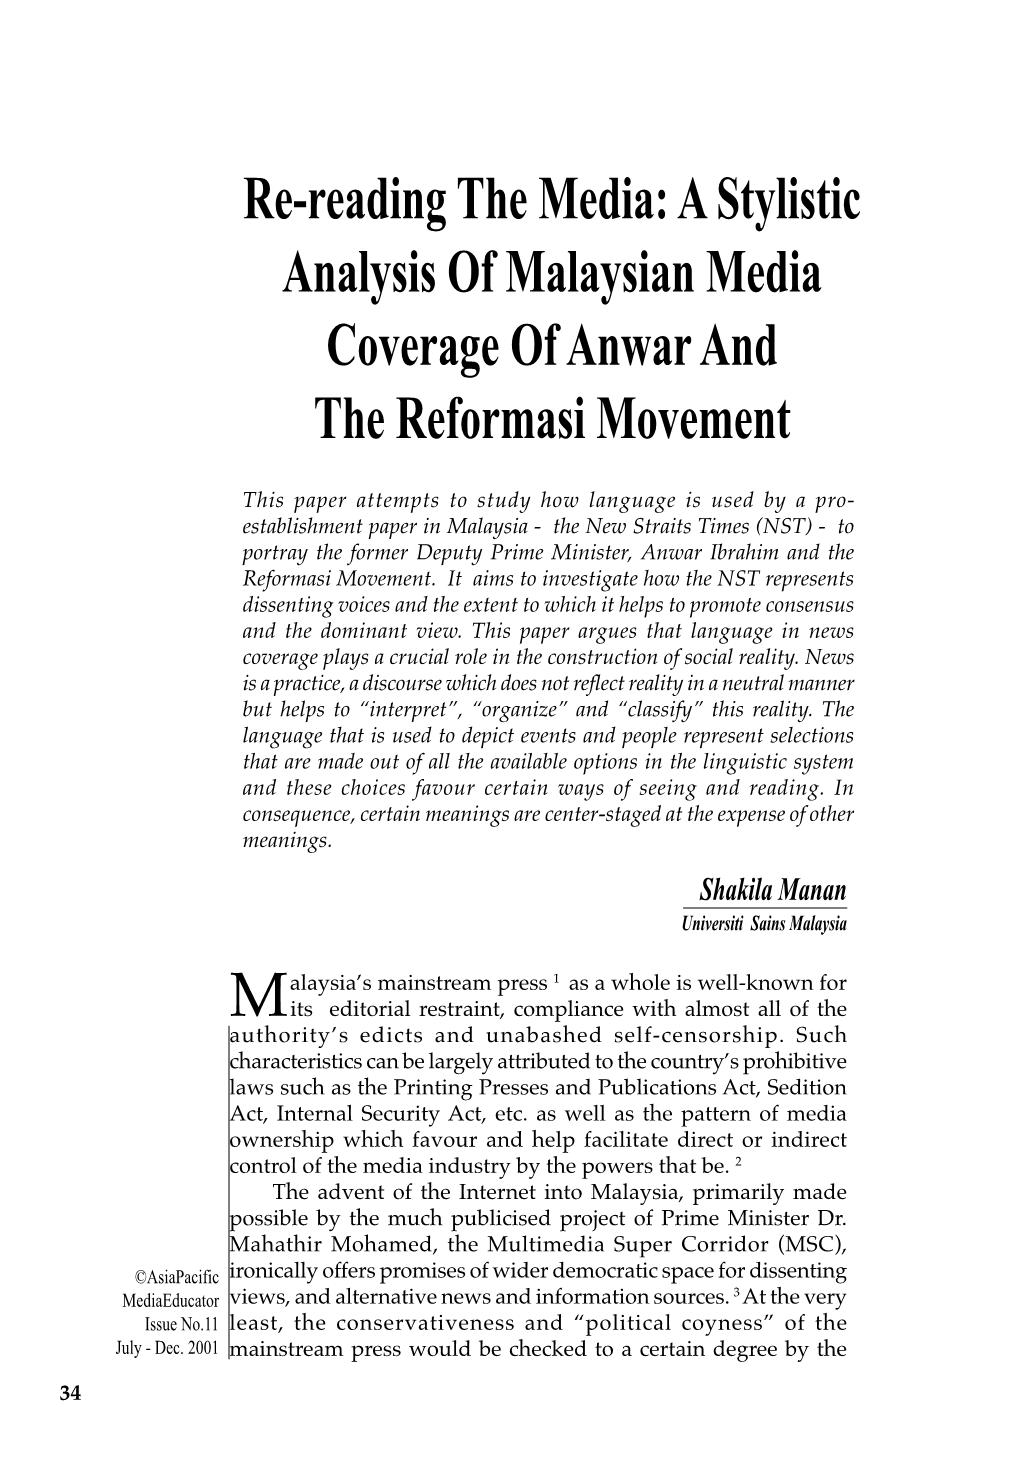 Re-Reading the Media: a Stylistic Analysis of Malaysian Media Coverage of Anwar and the Reformasi Movement